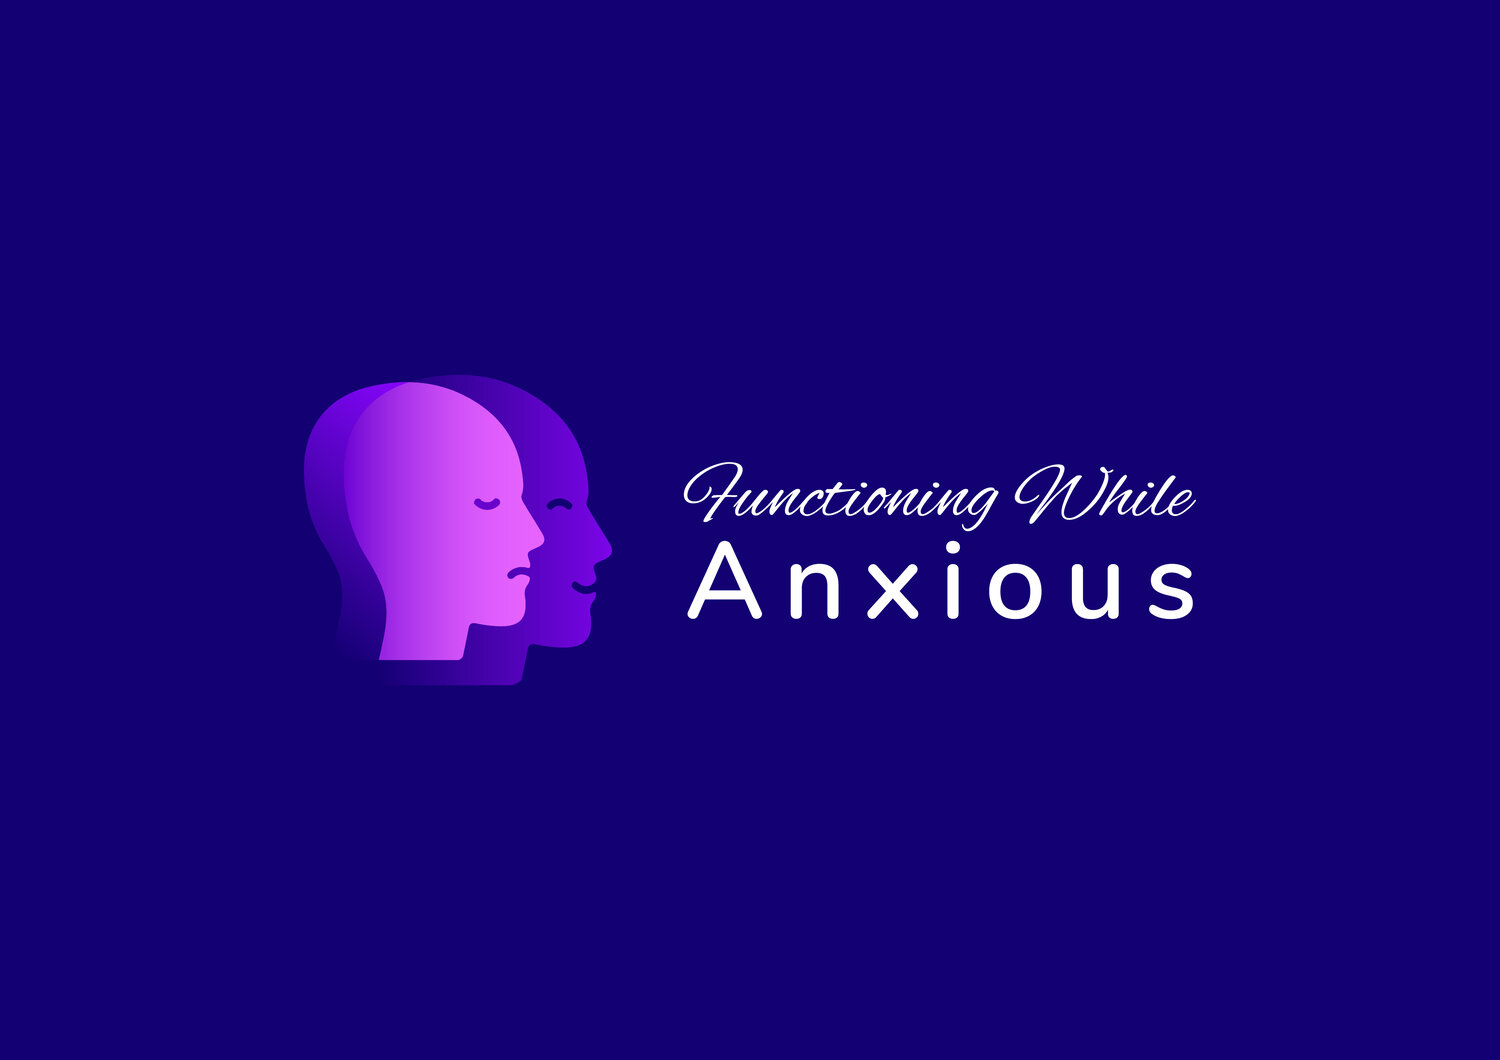 Functioning While Anxious